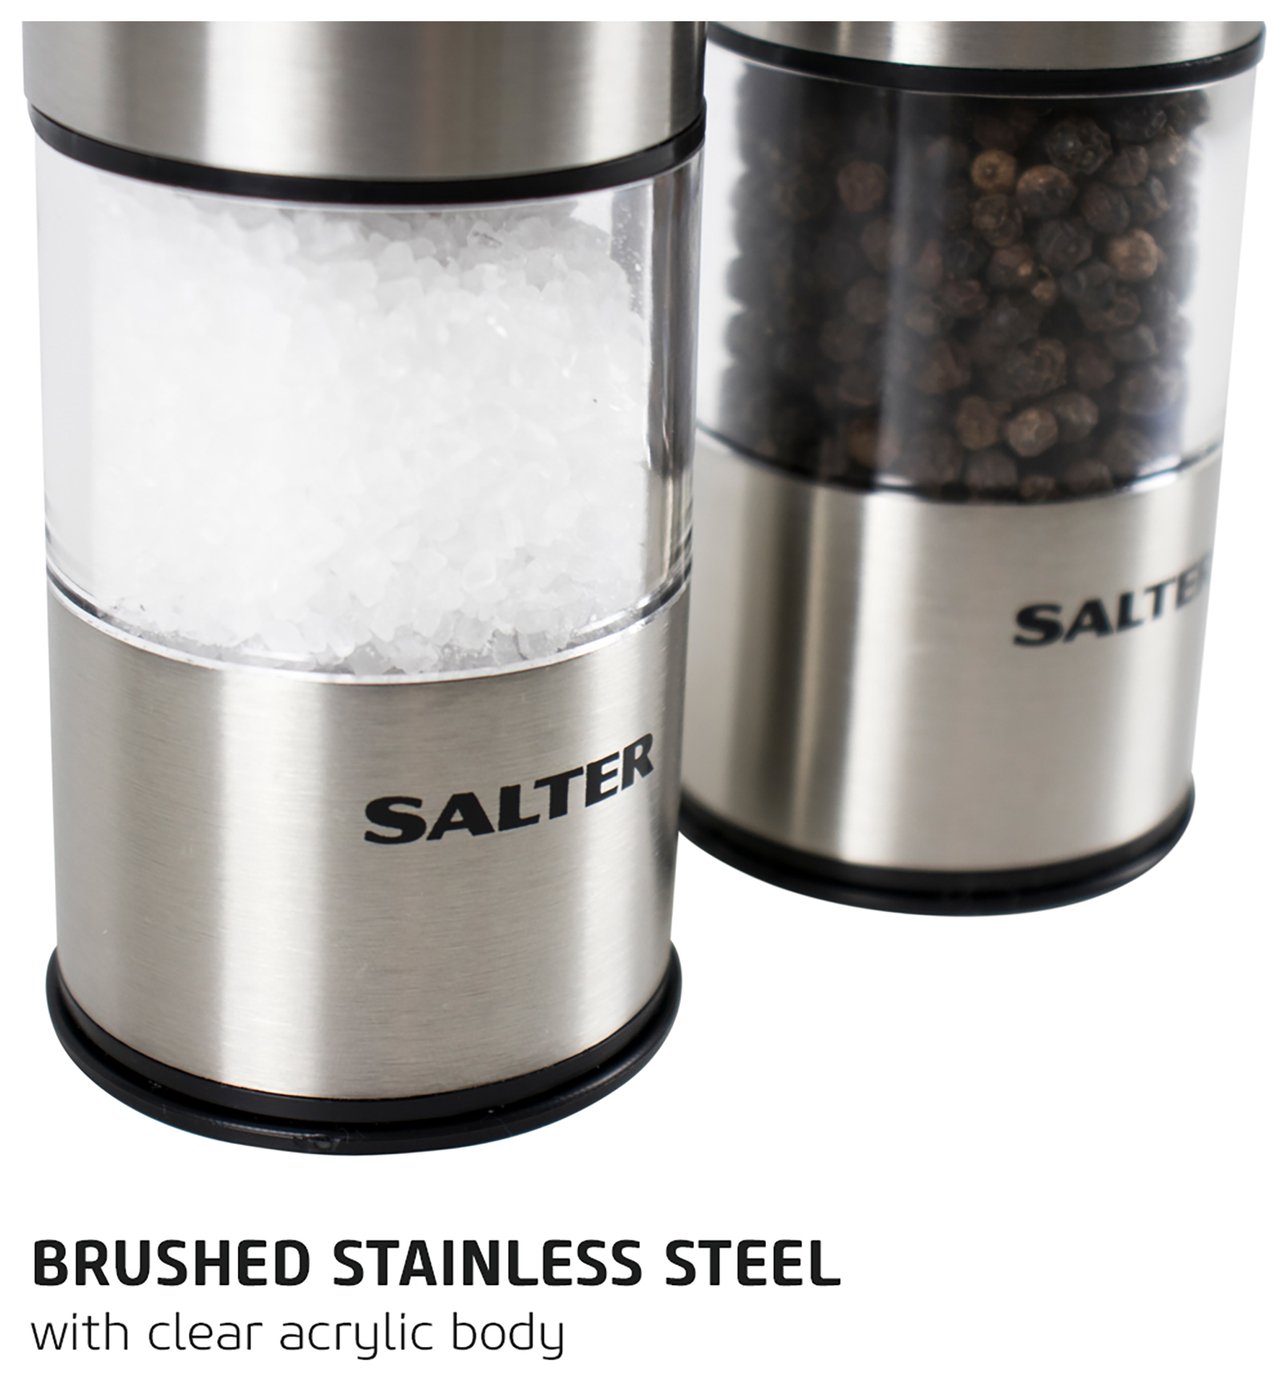 Salter Stainless Steel Electronic Salt and Pepper Mill Review